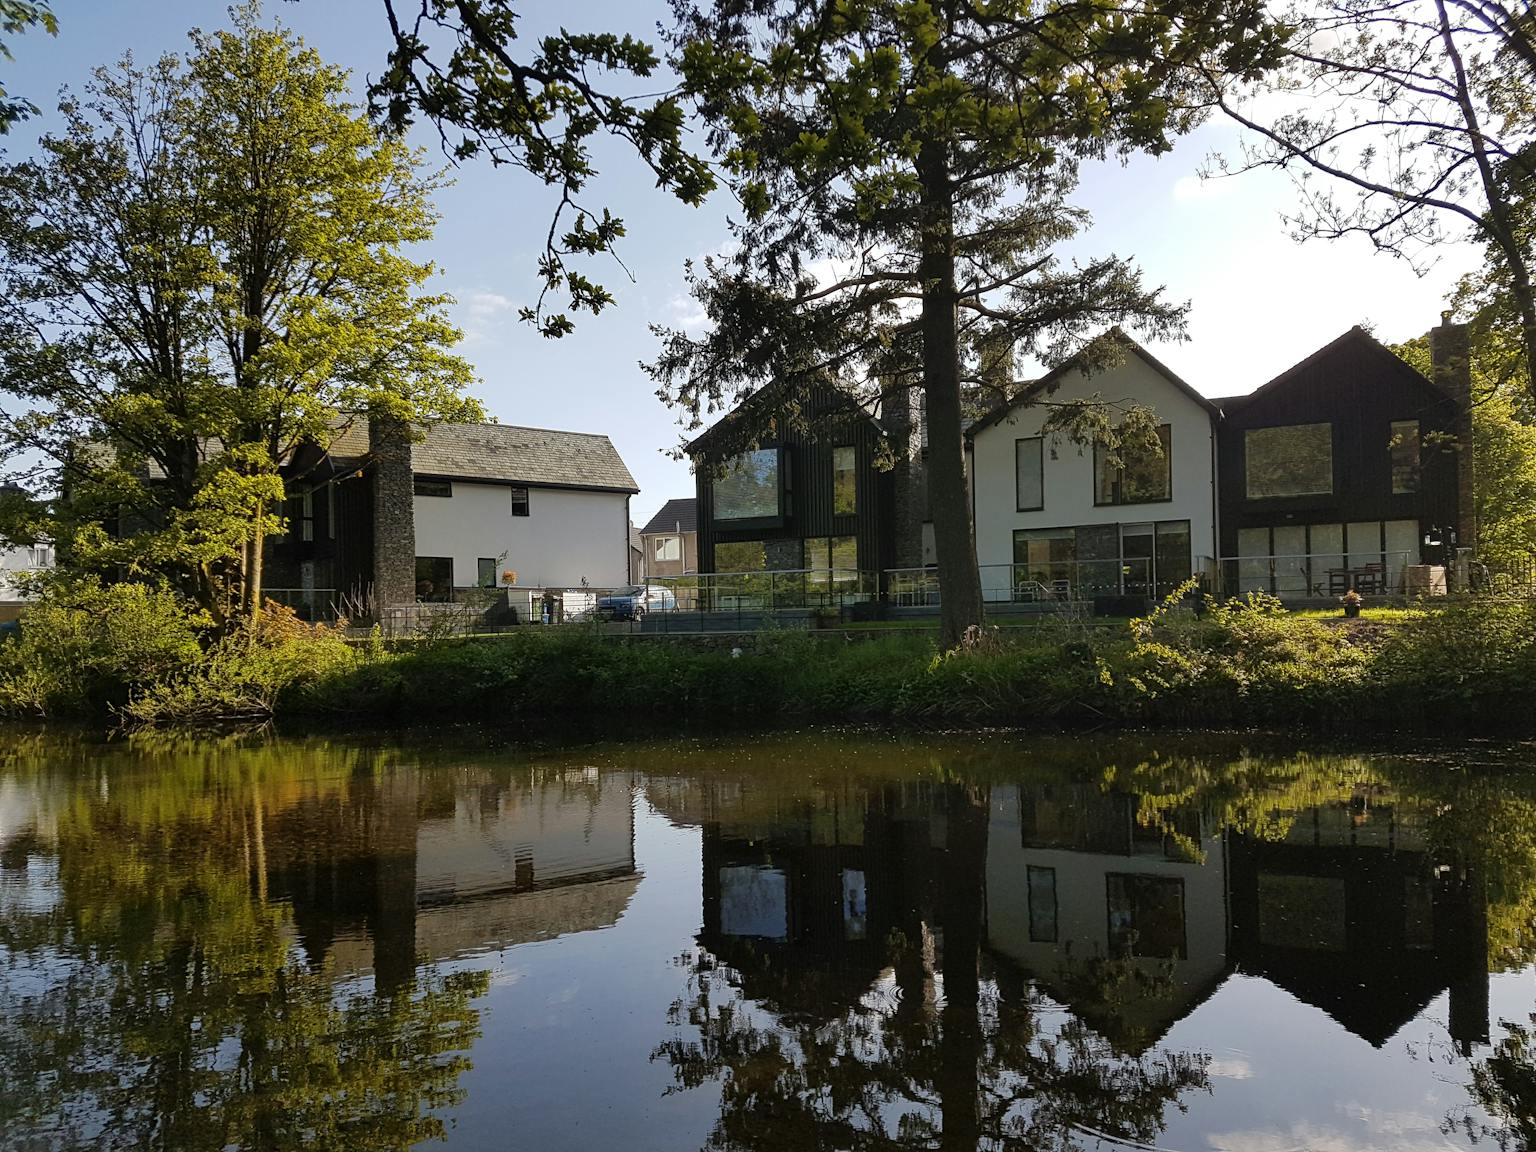 Houses by lake